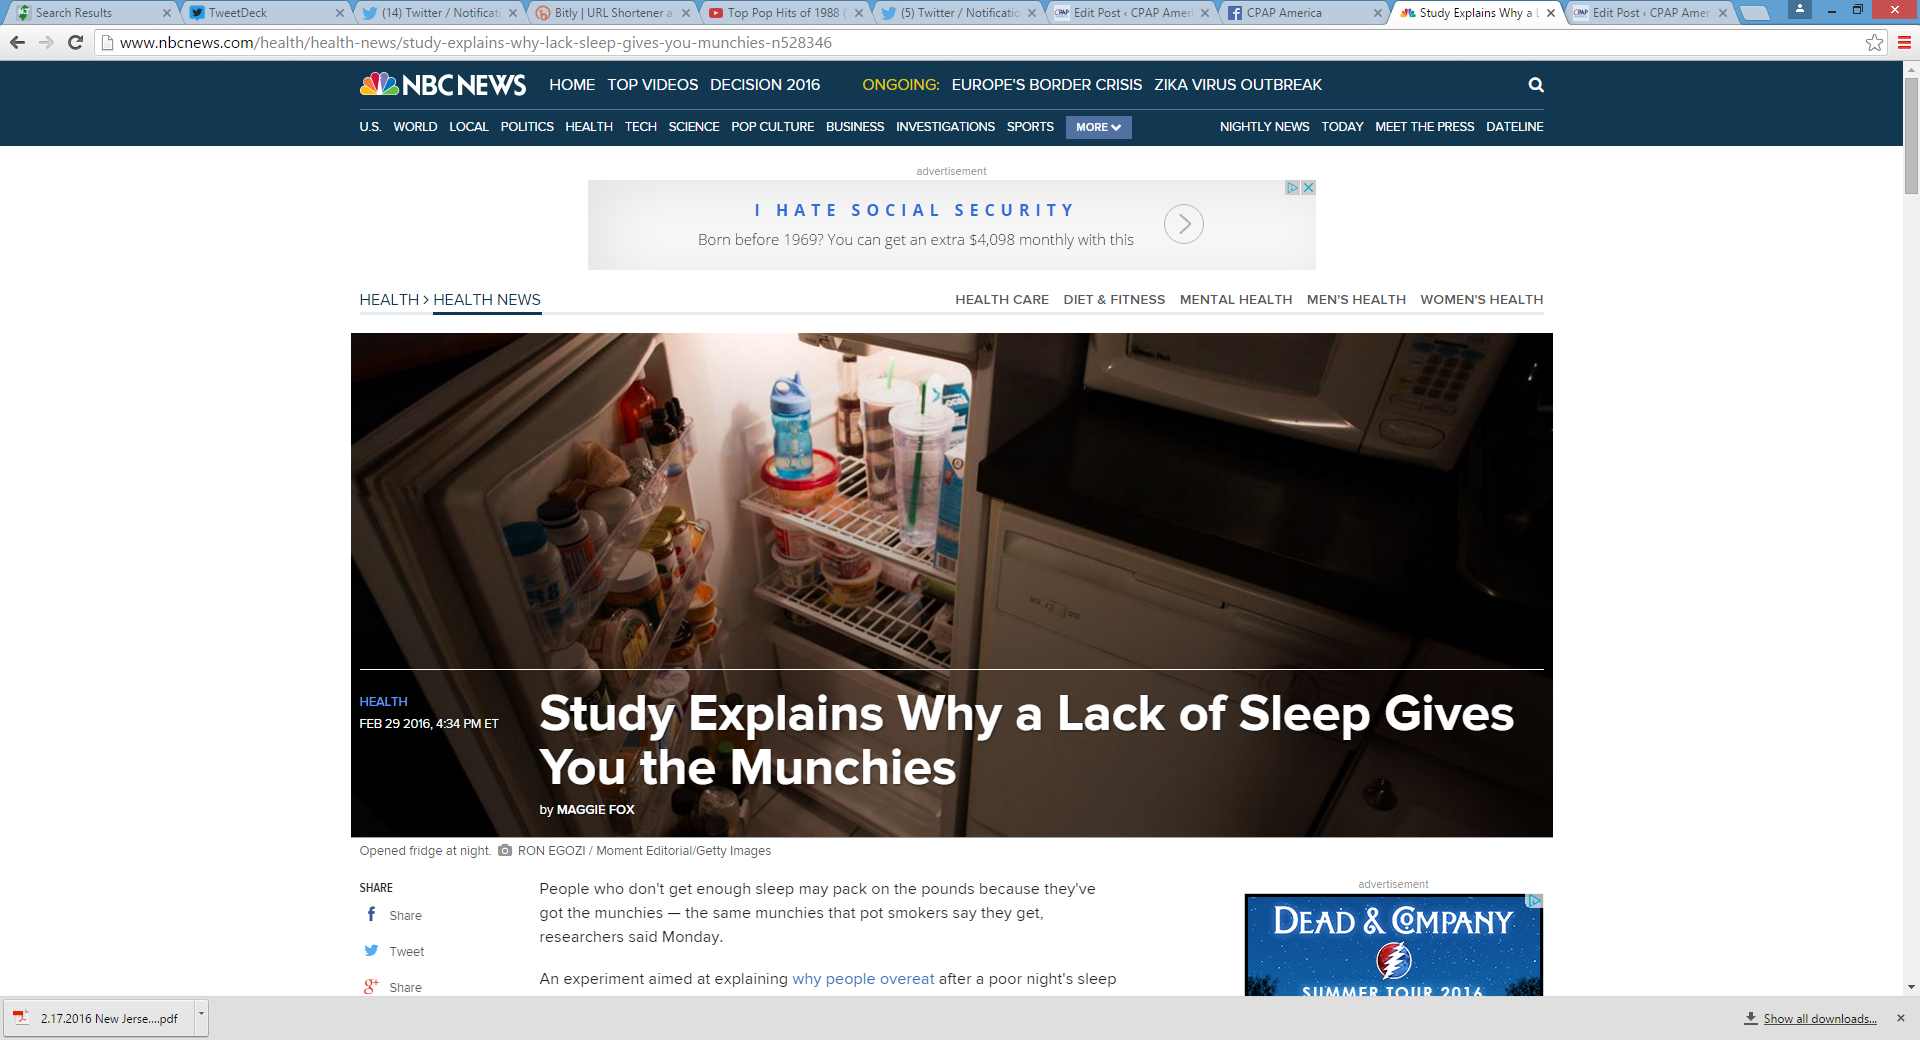 People who don't get enough sleep may pack on the pounds because they've got the munchies — the same munchies that pot smokers say they get, researchers said Monday.